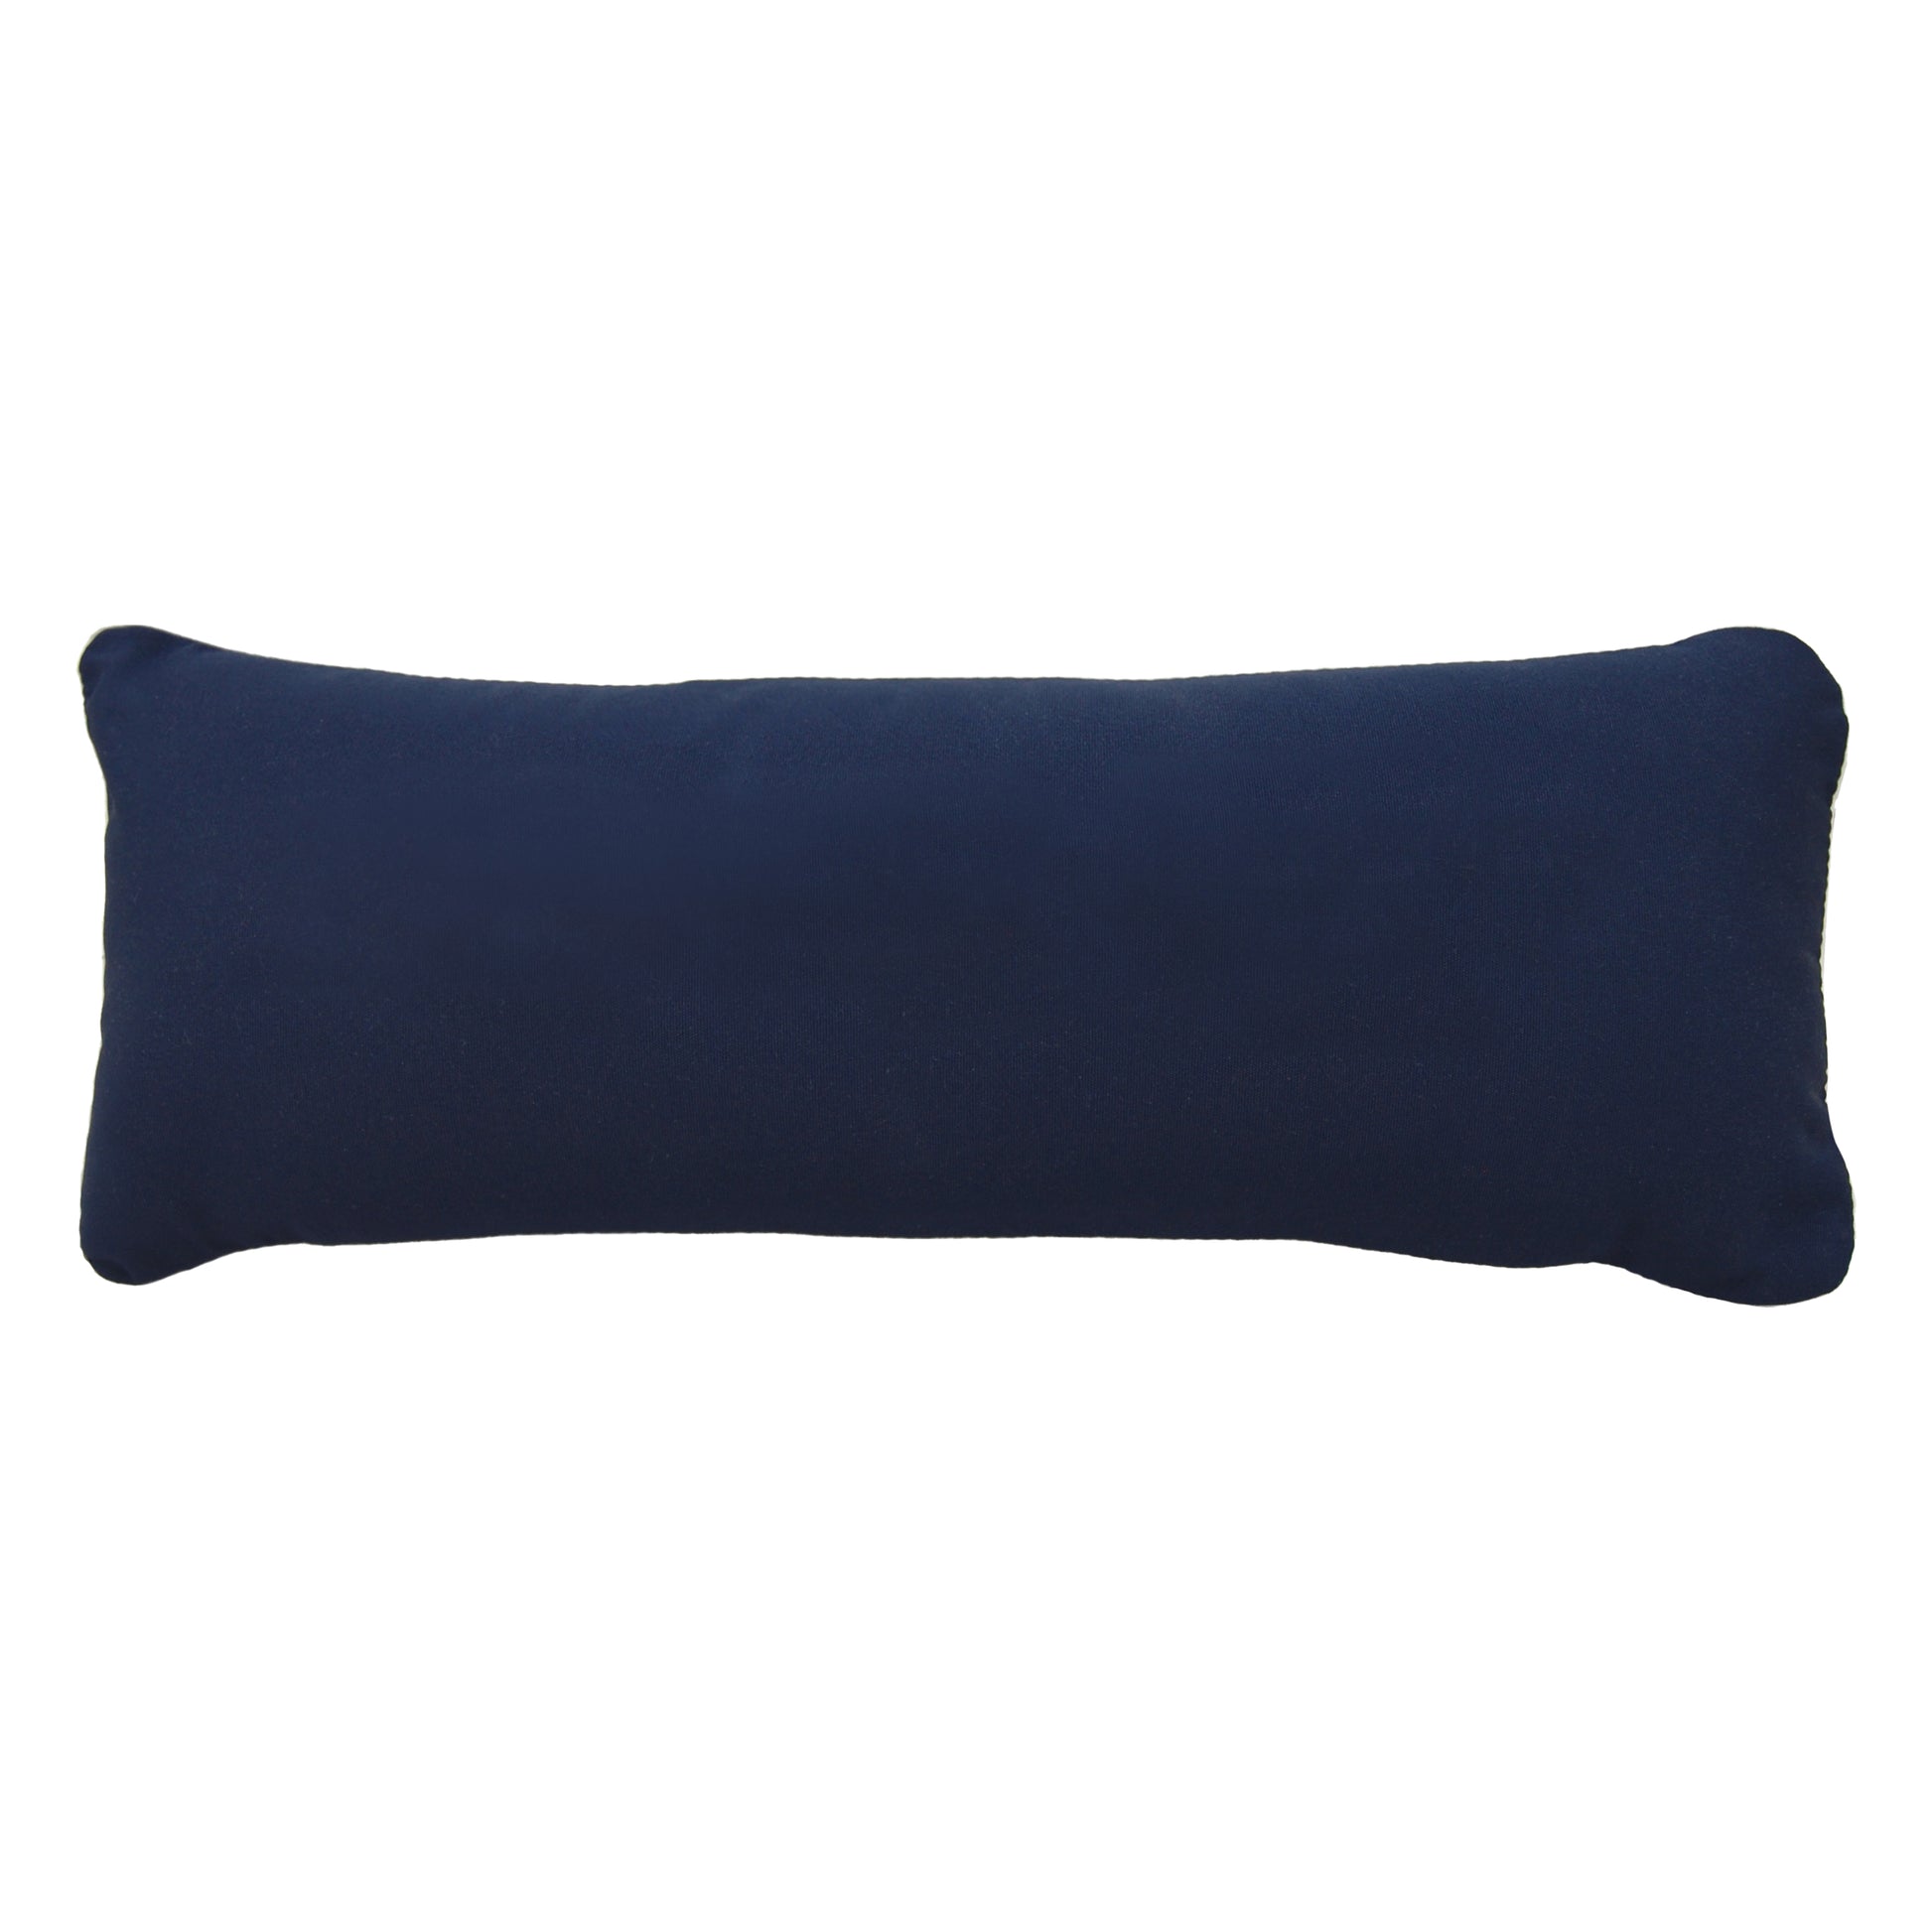 Solid navy fabric; back of the Whiskey Tango Foxtrot outdoor pillow.